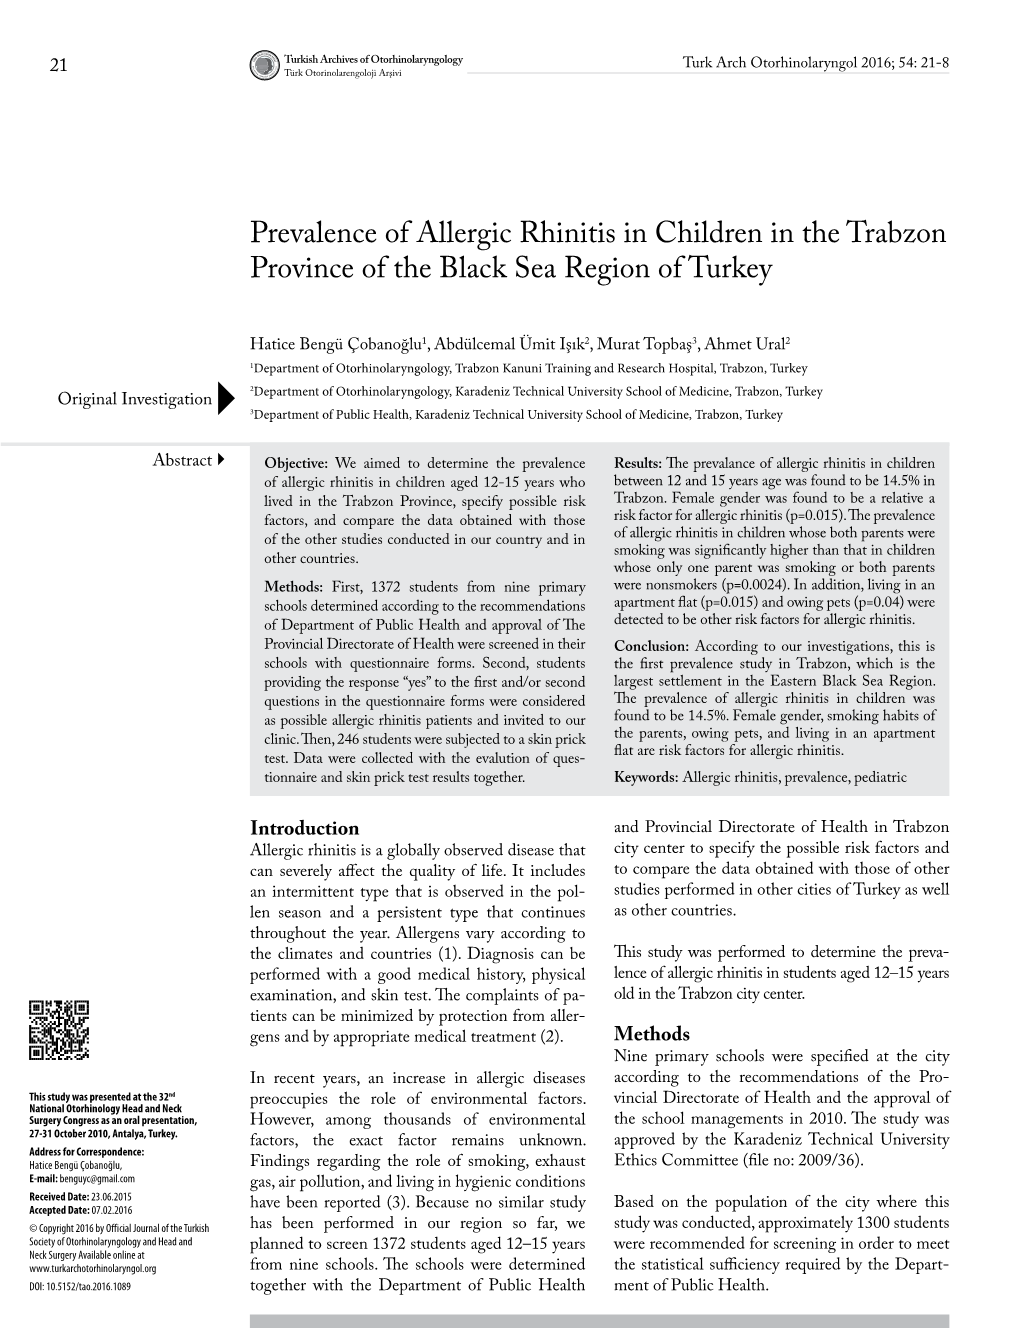 Prevalence of Allergic Rhinitis in Children in the Trabzon Province of the Black Sea Region of Turkey